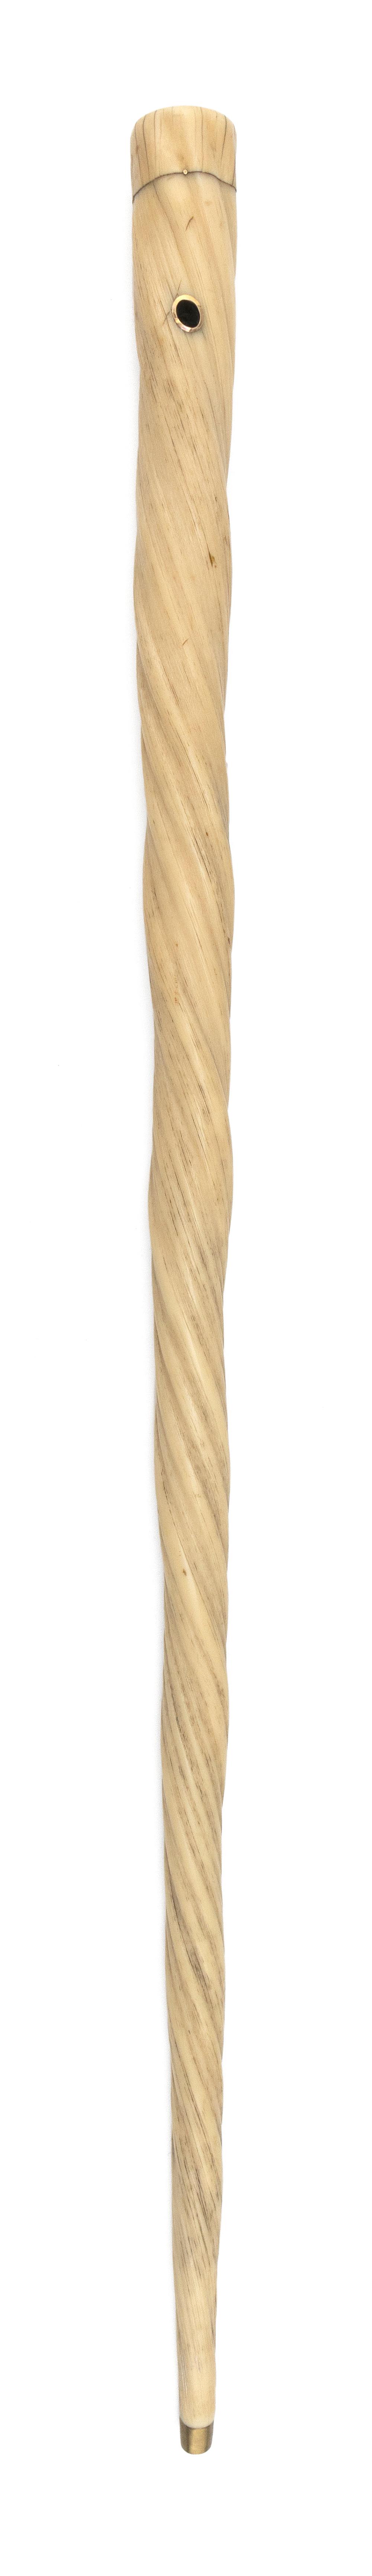  NARWHAL TUSK CANE 19TH CENTURY 34d7e0